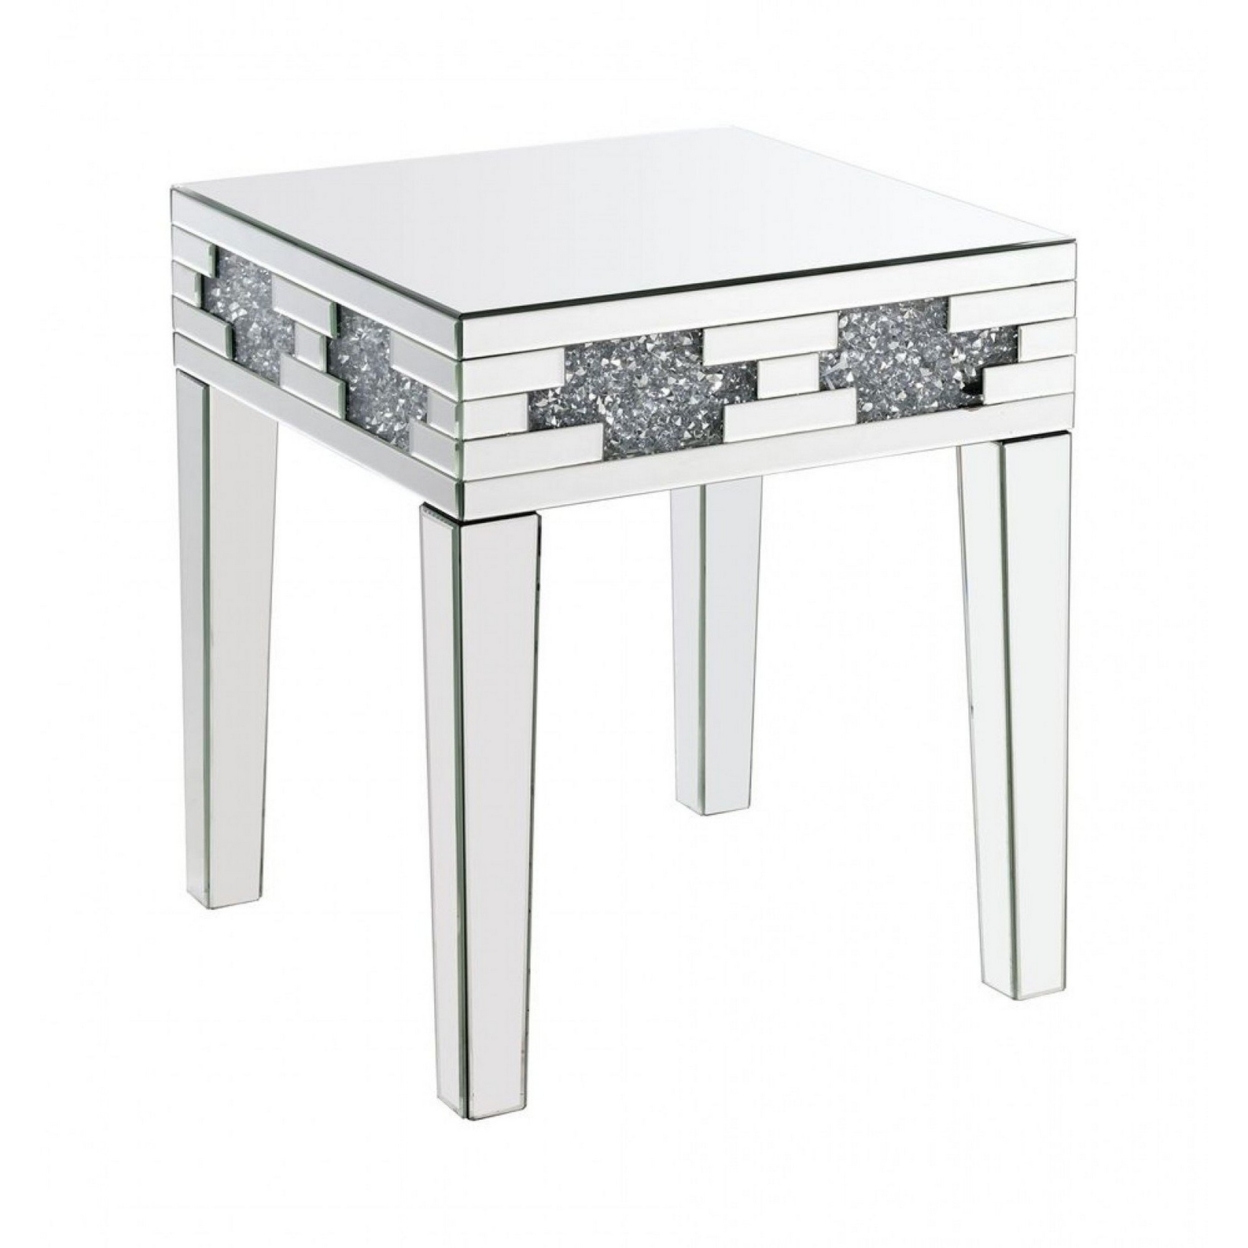 End Table With Mirror Panel Framing And Faux Diamonds, Silver- Saltoro Sherpi